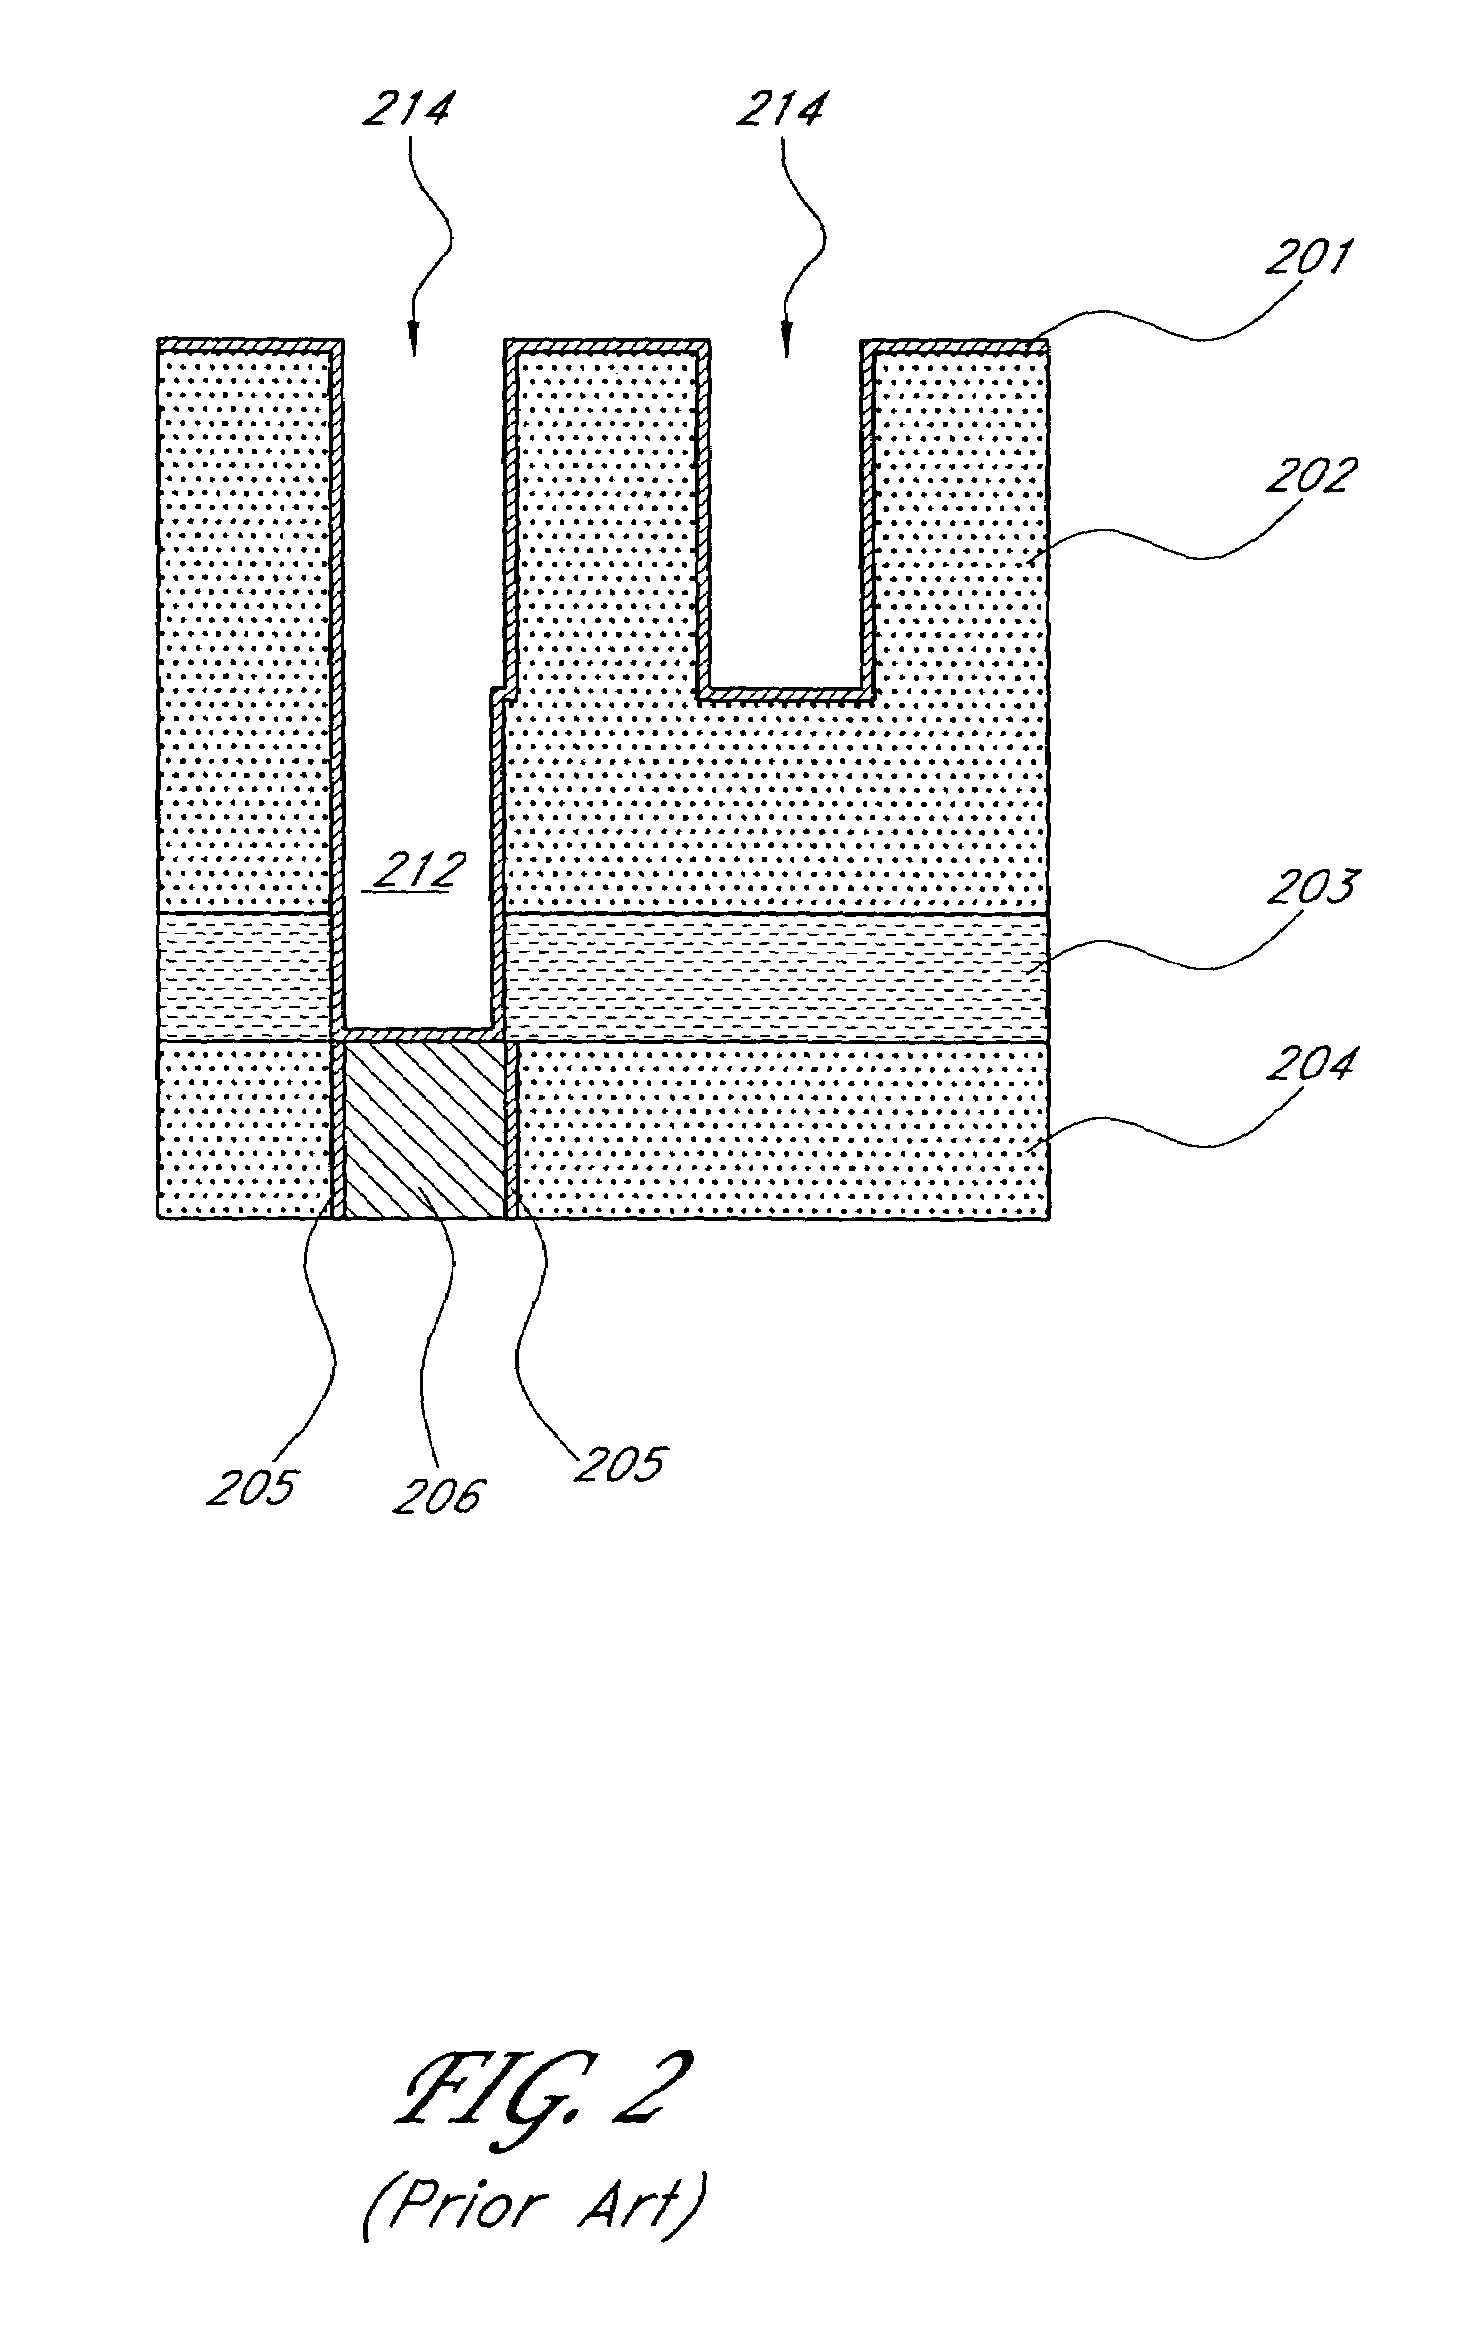 Selective formation of metal layers in an integrated circuit